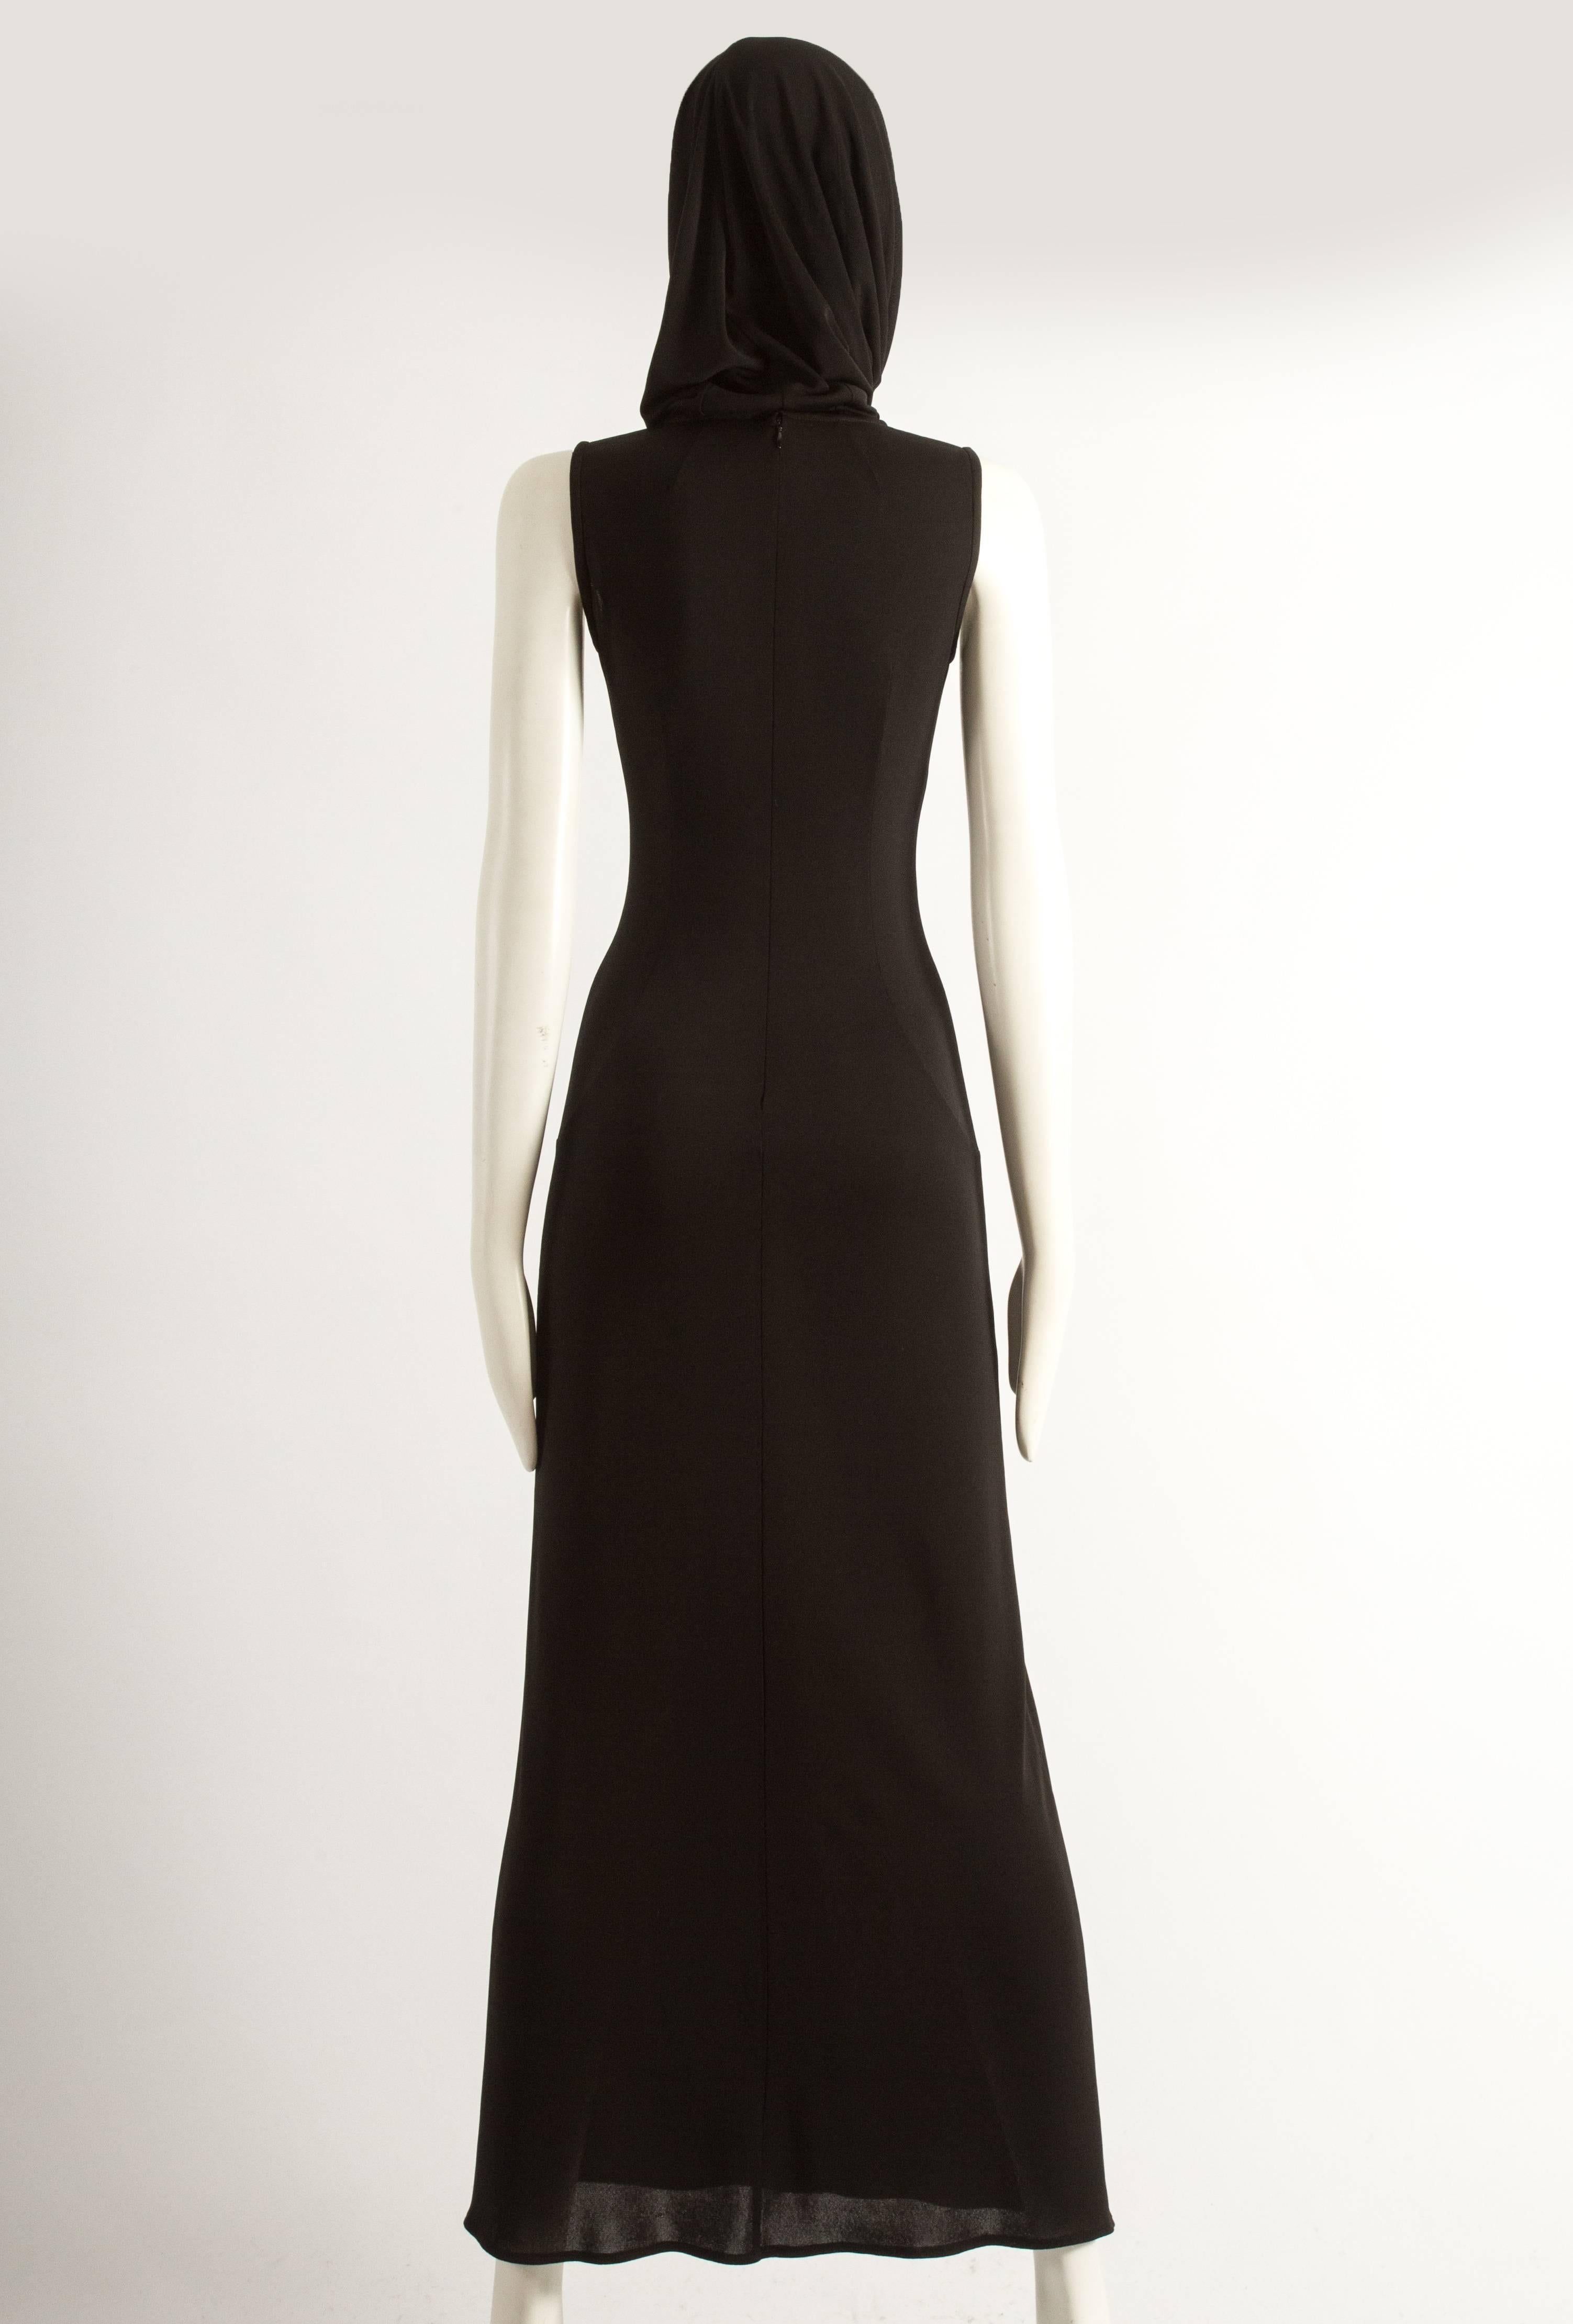 Dolce & Gabbana Spring-Summer 1996 black hooded evening dress In Excellent Condition In London, GB